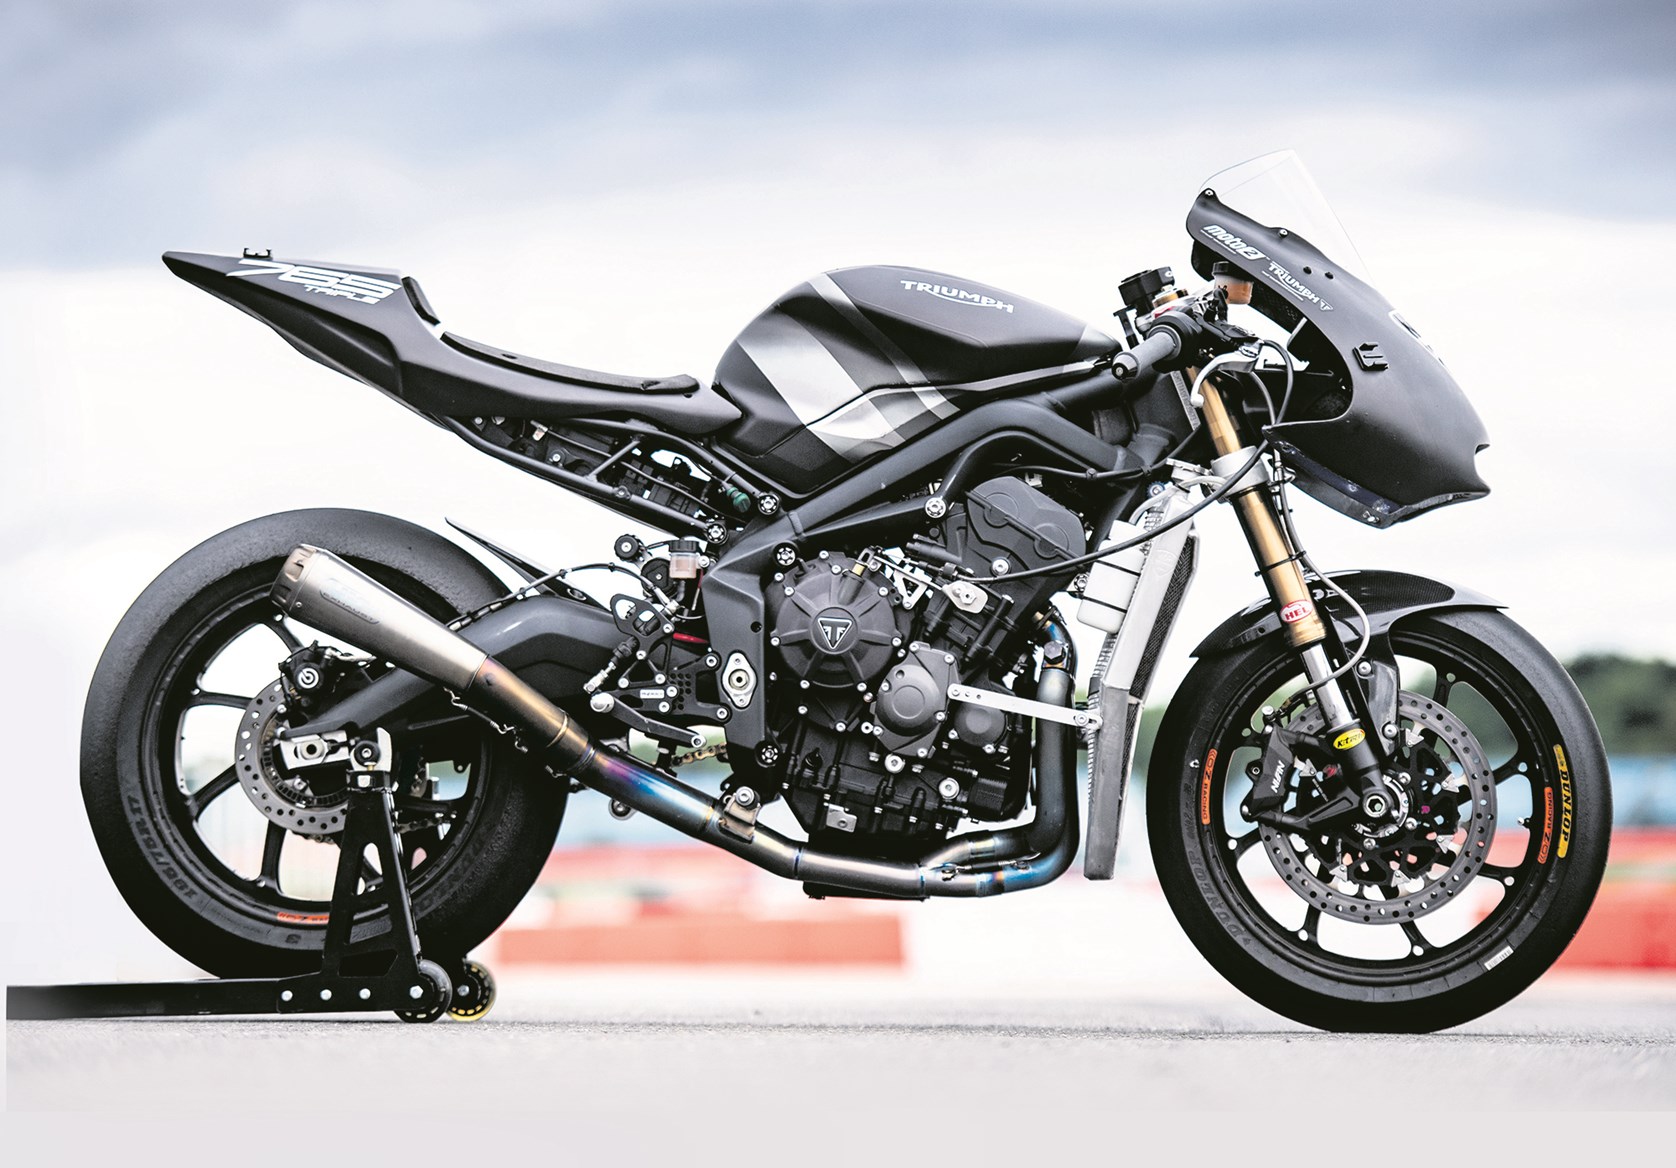 Gek Hoeveelheid geld Schrijft een rapport How Much Power Does the 2019 Triumph Moto2 Engine Make? - Motorcycle news,  Motorcycle reviews from Malaysia, Asia and the world - BikesRepublic.com